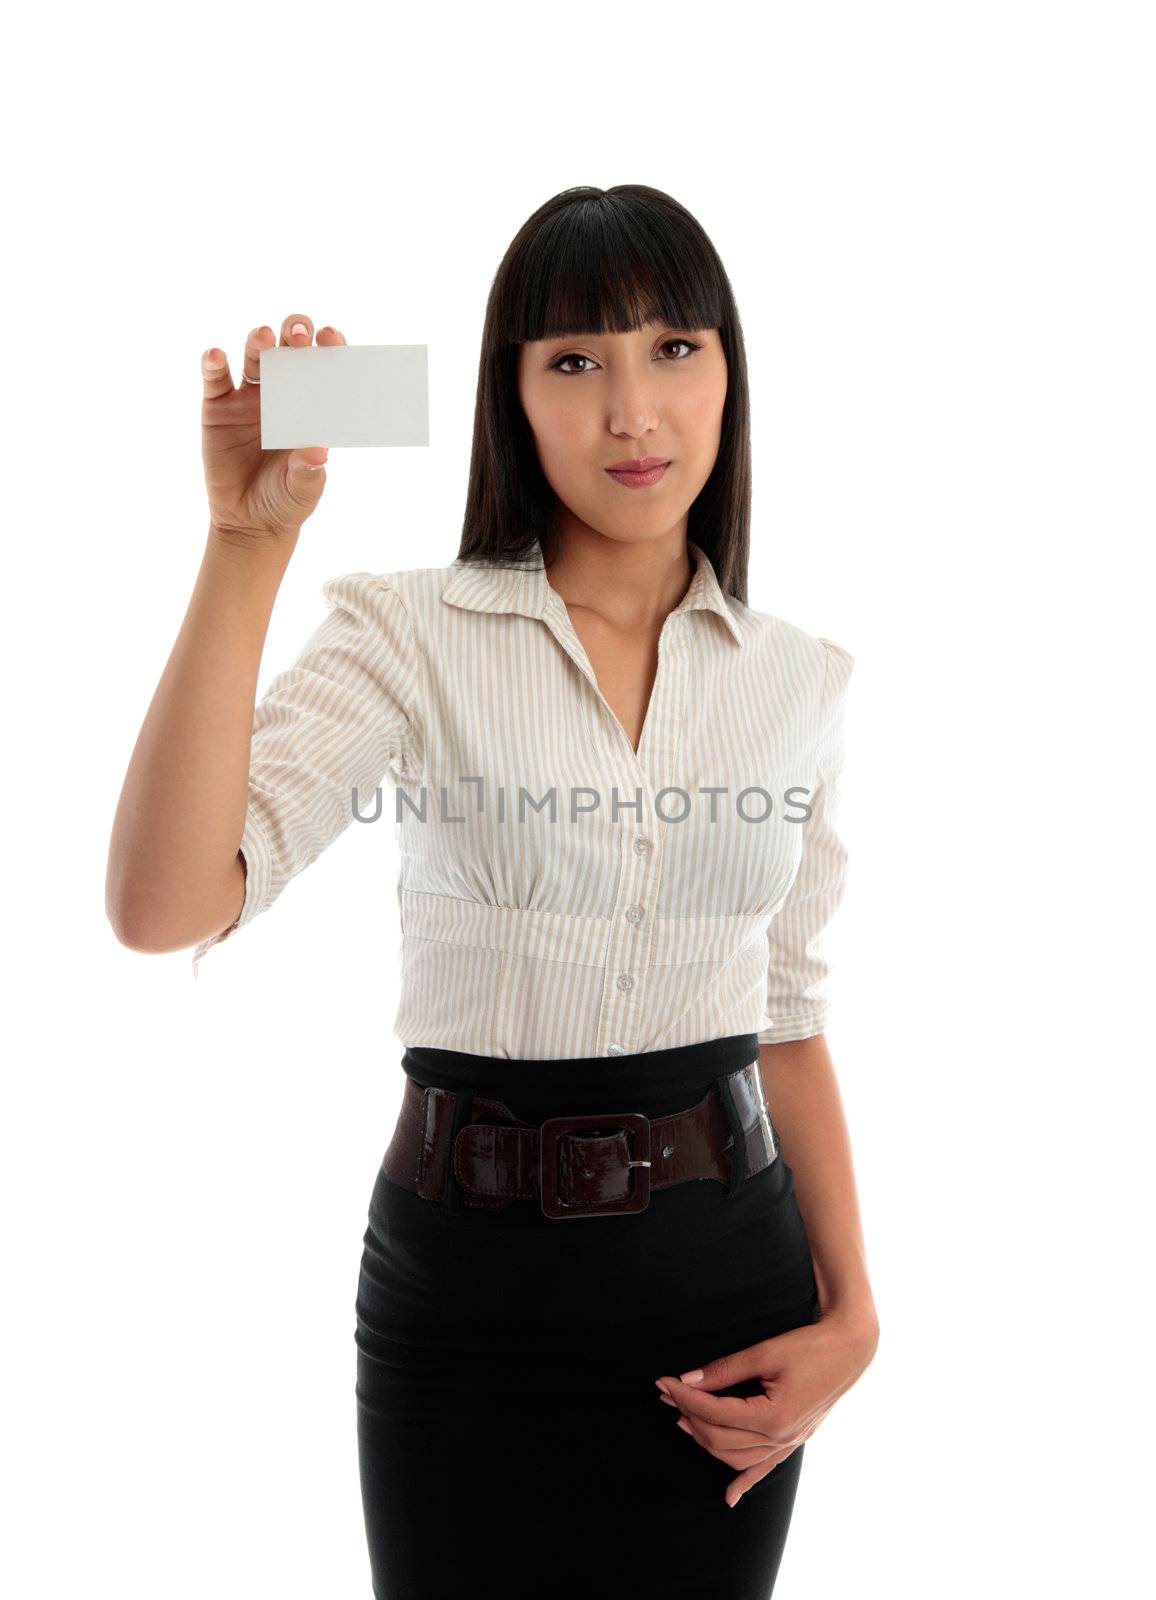 A young beautiful business office worker holds up a blank business card, club card or other type of card..  White background.